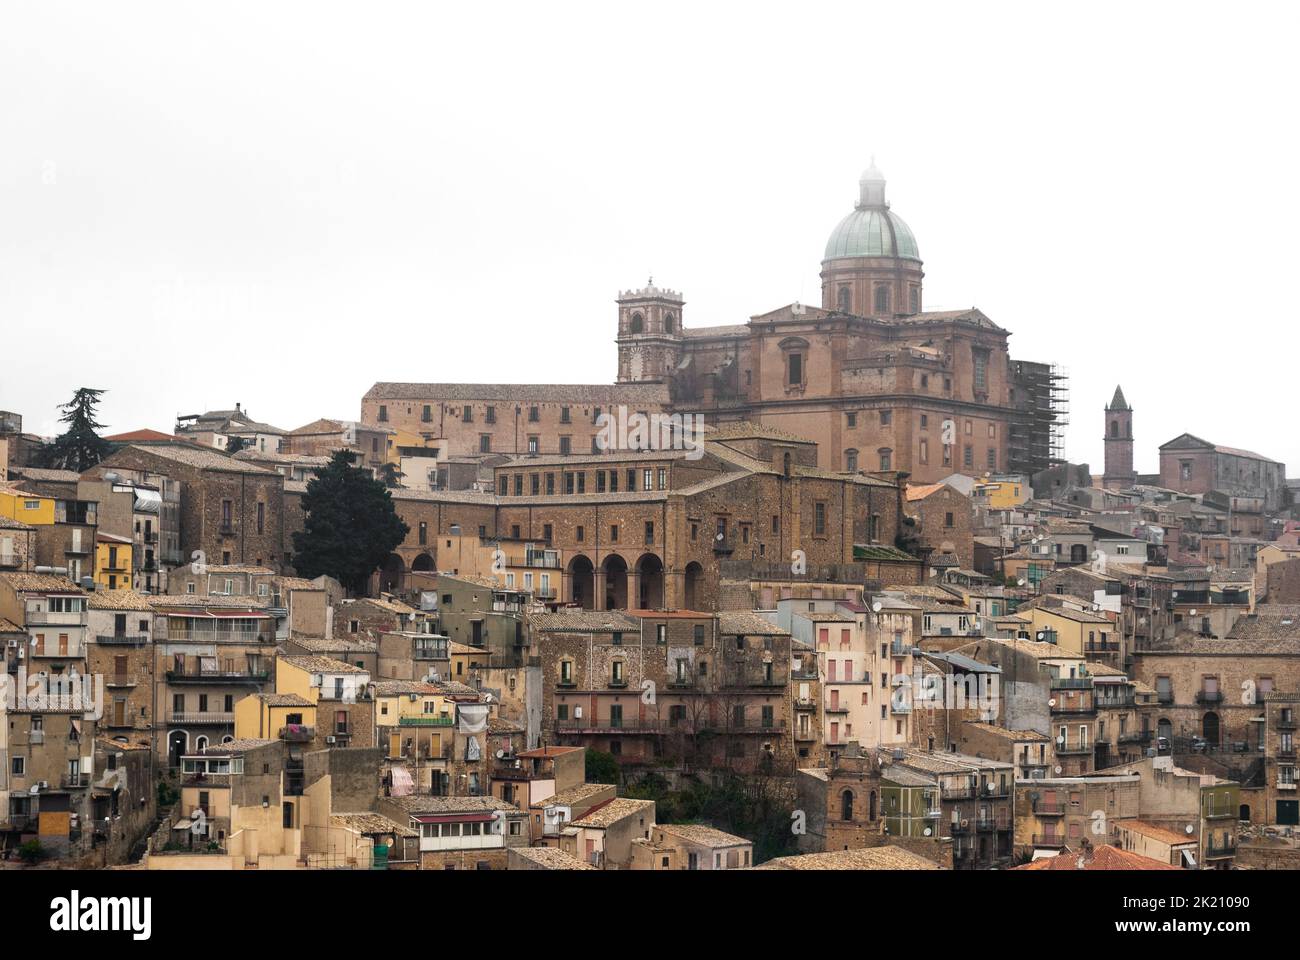 Panoramic view of Piazza Armerina, small town in inland Sicily with overcast sky Stock Photo